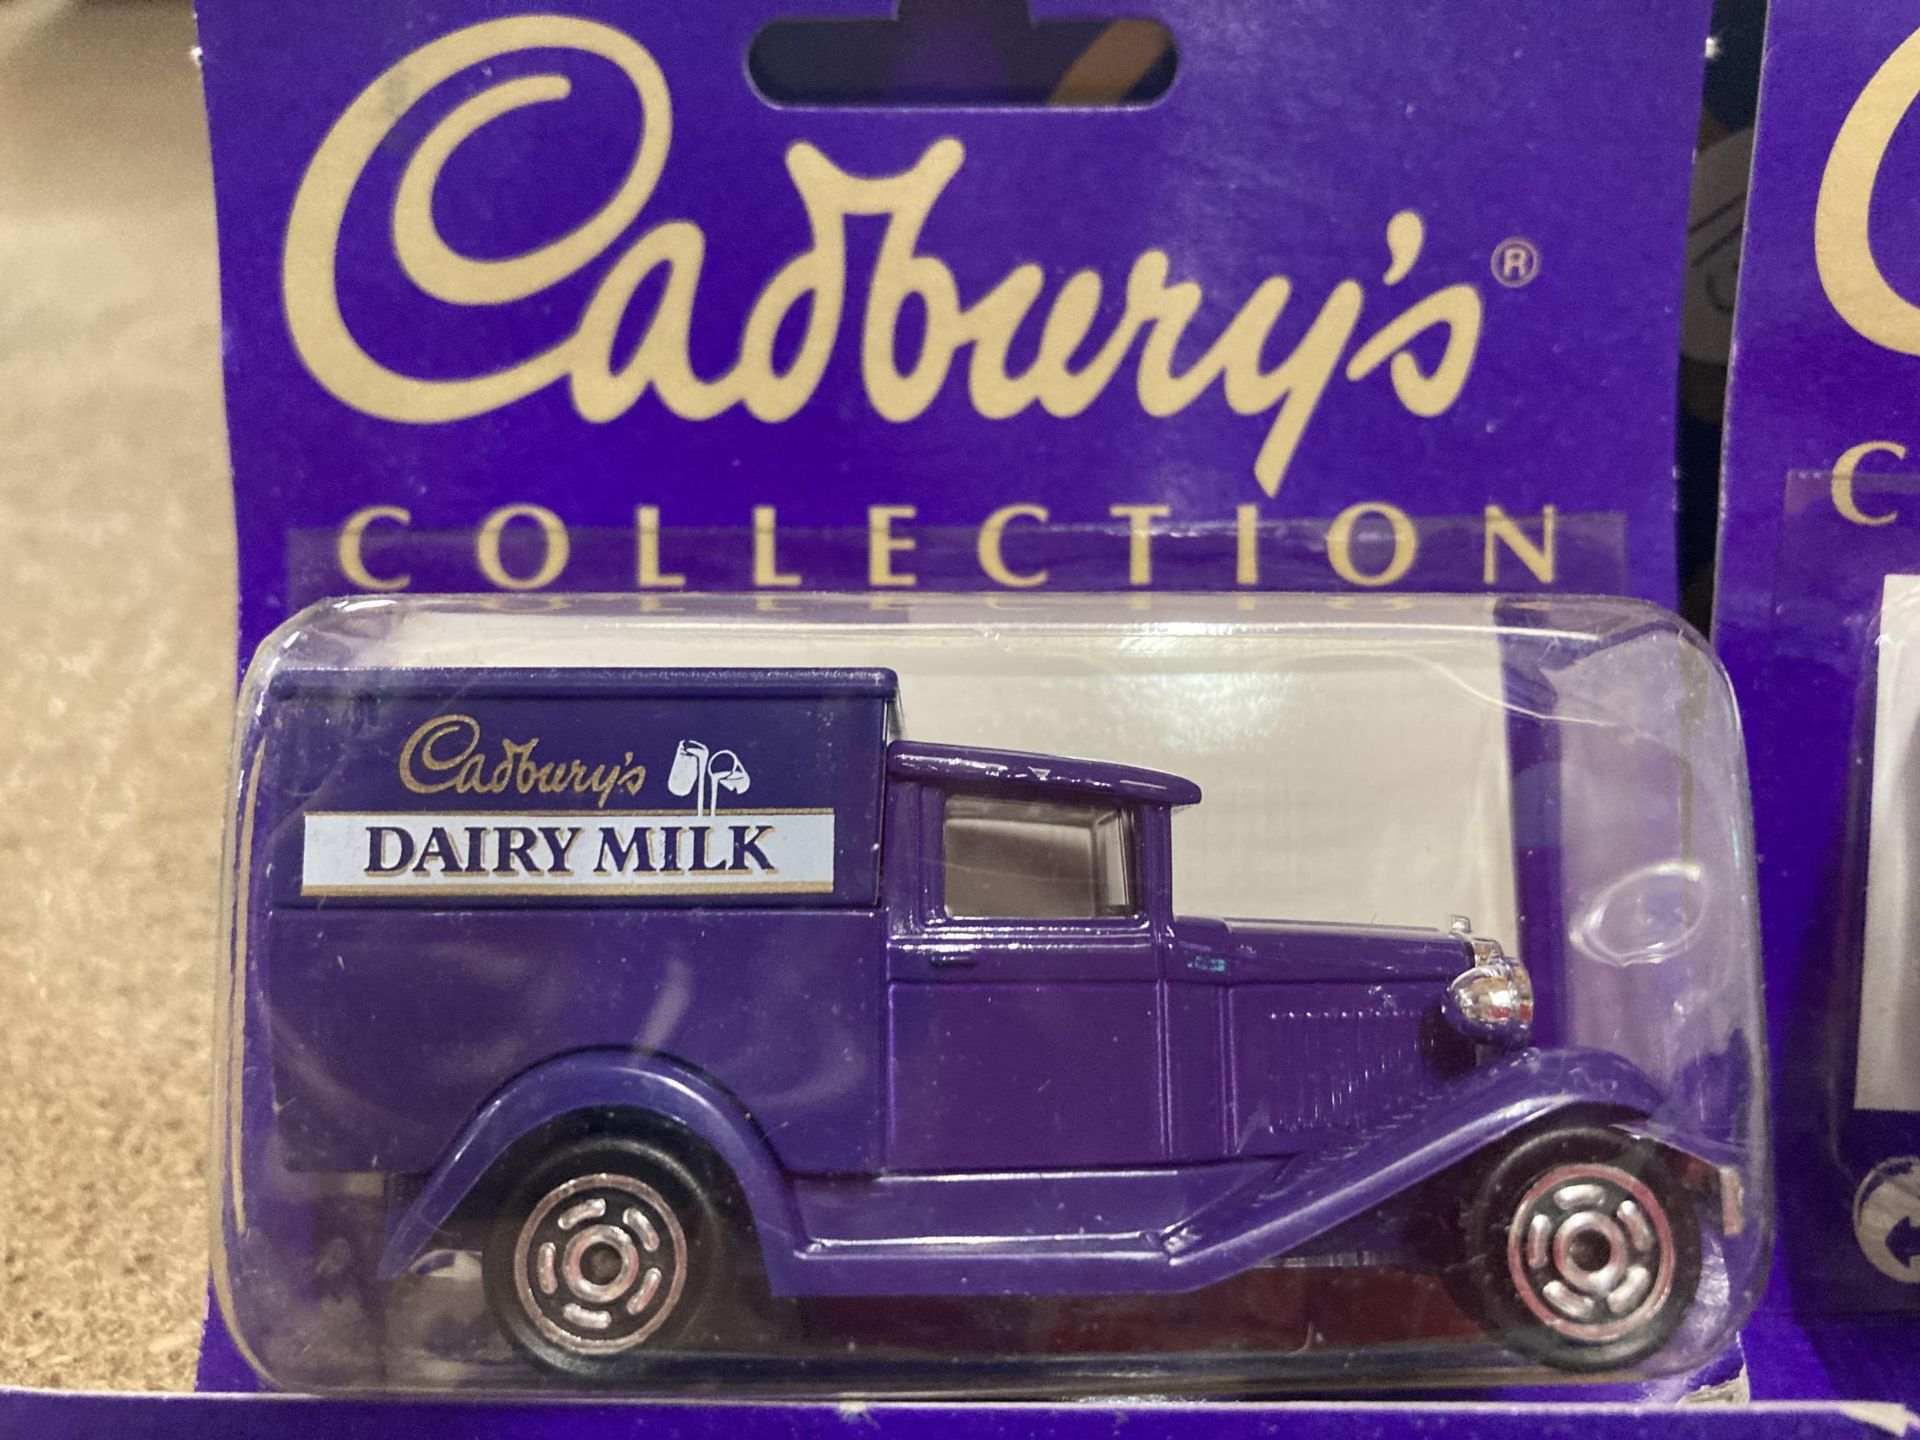 A GROUP OF CADBURY COLLECTION MODEL VANS - Image 3 of 4